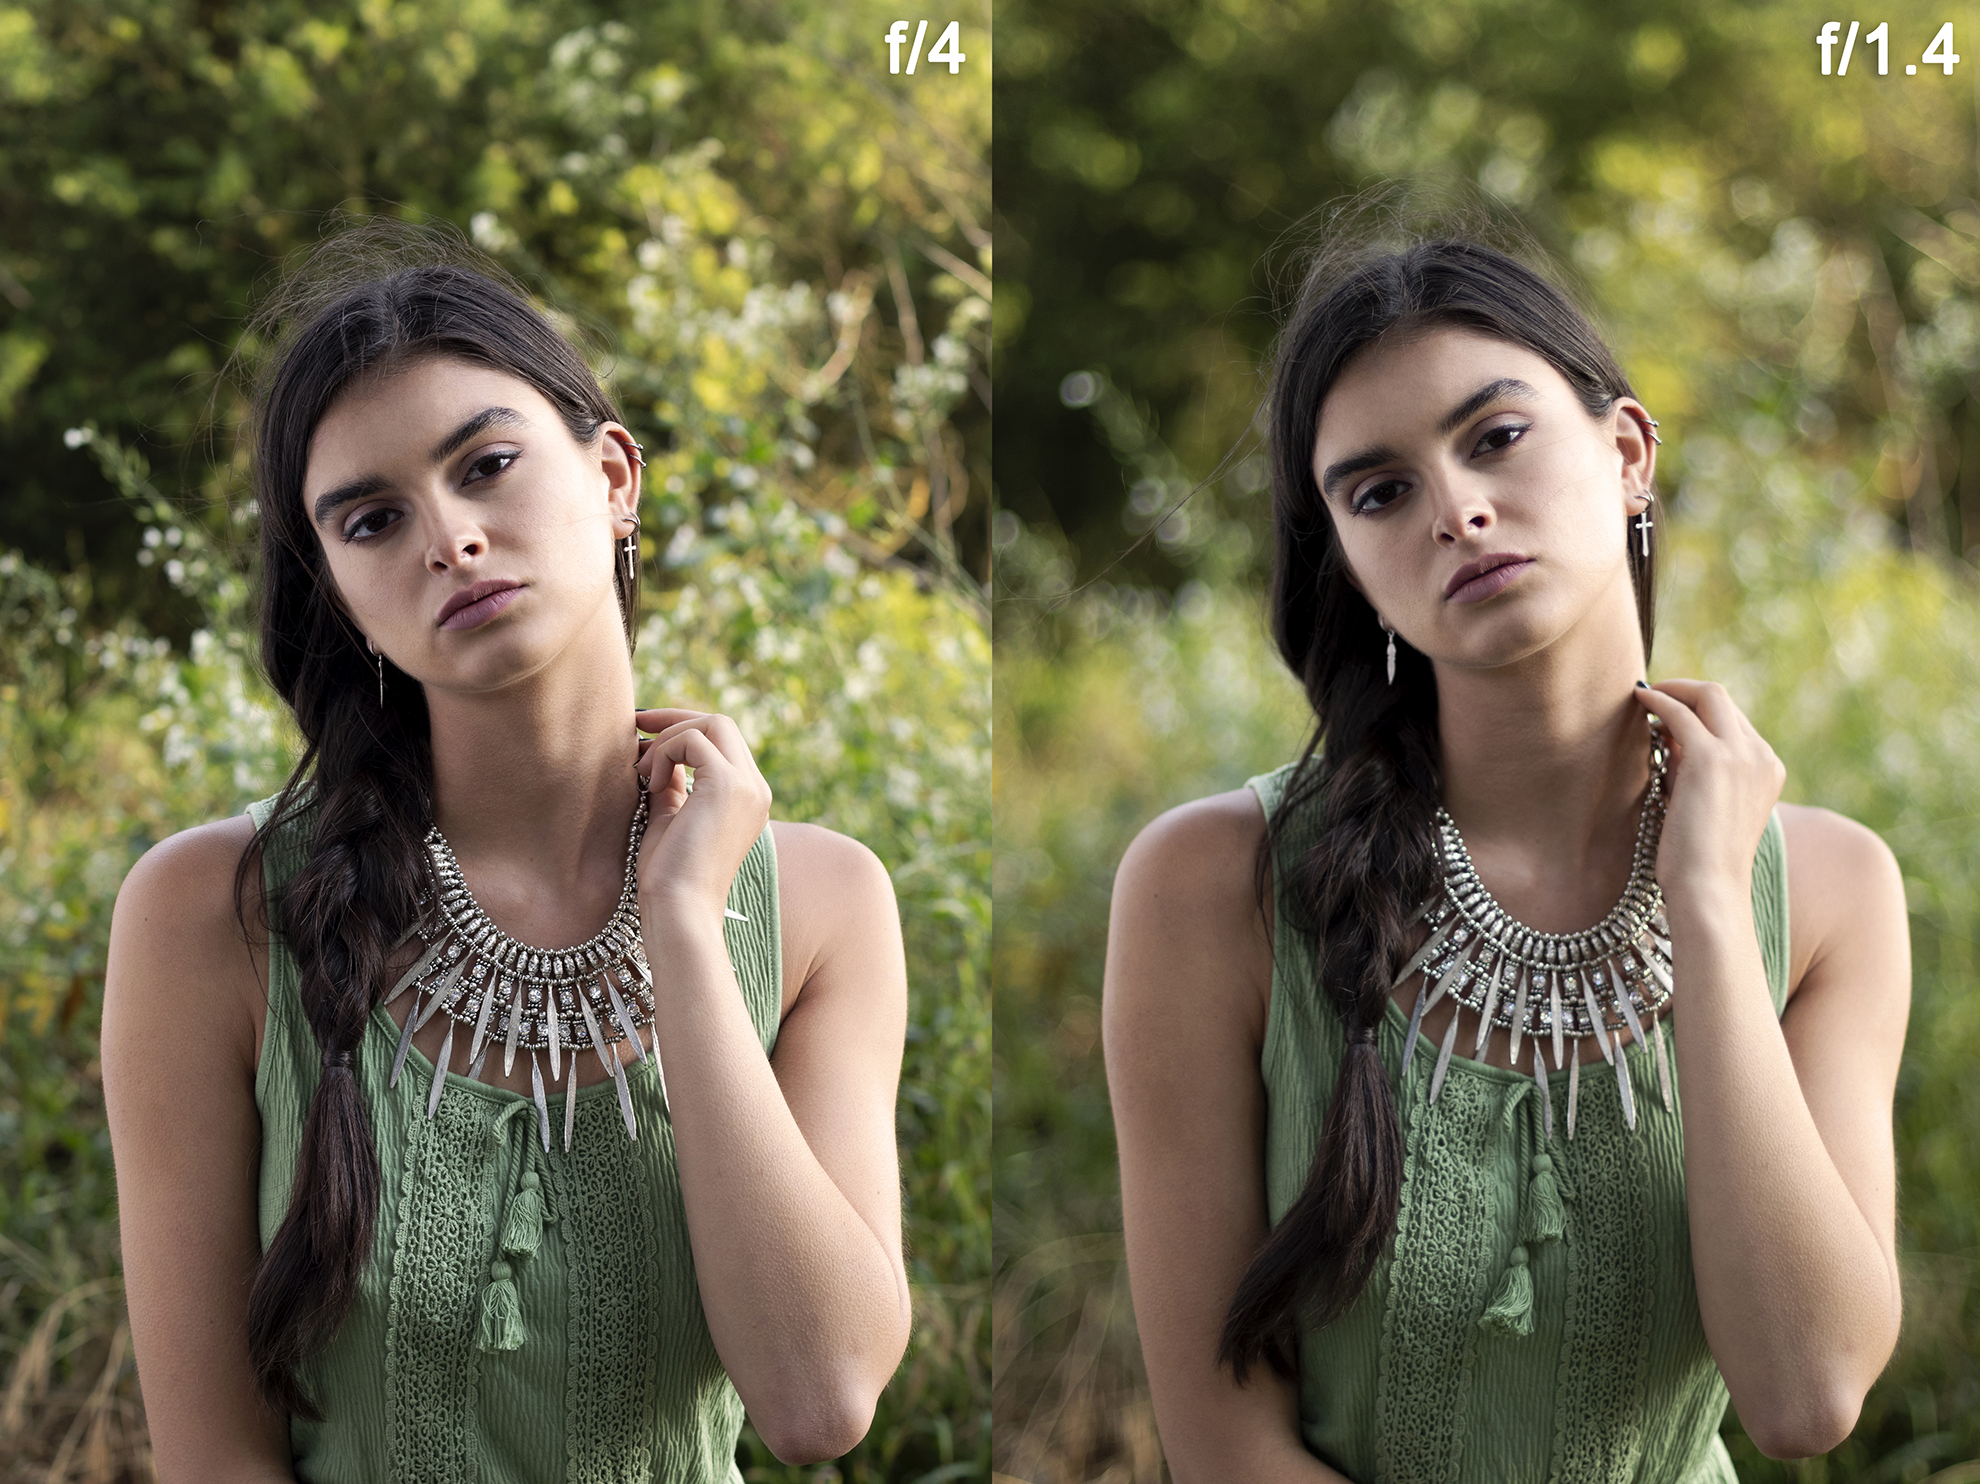 Side-by-side comparison of the same woman photographed in a front of green bushes and trees - her hand is posed touching her neck with her loose braid swept to the side - f/4 clear background vs f/1.4 blurred background